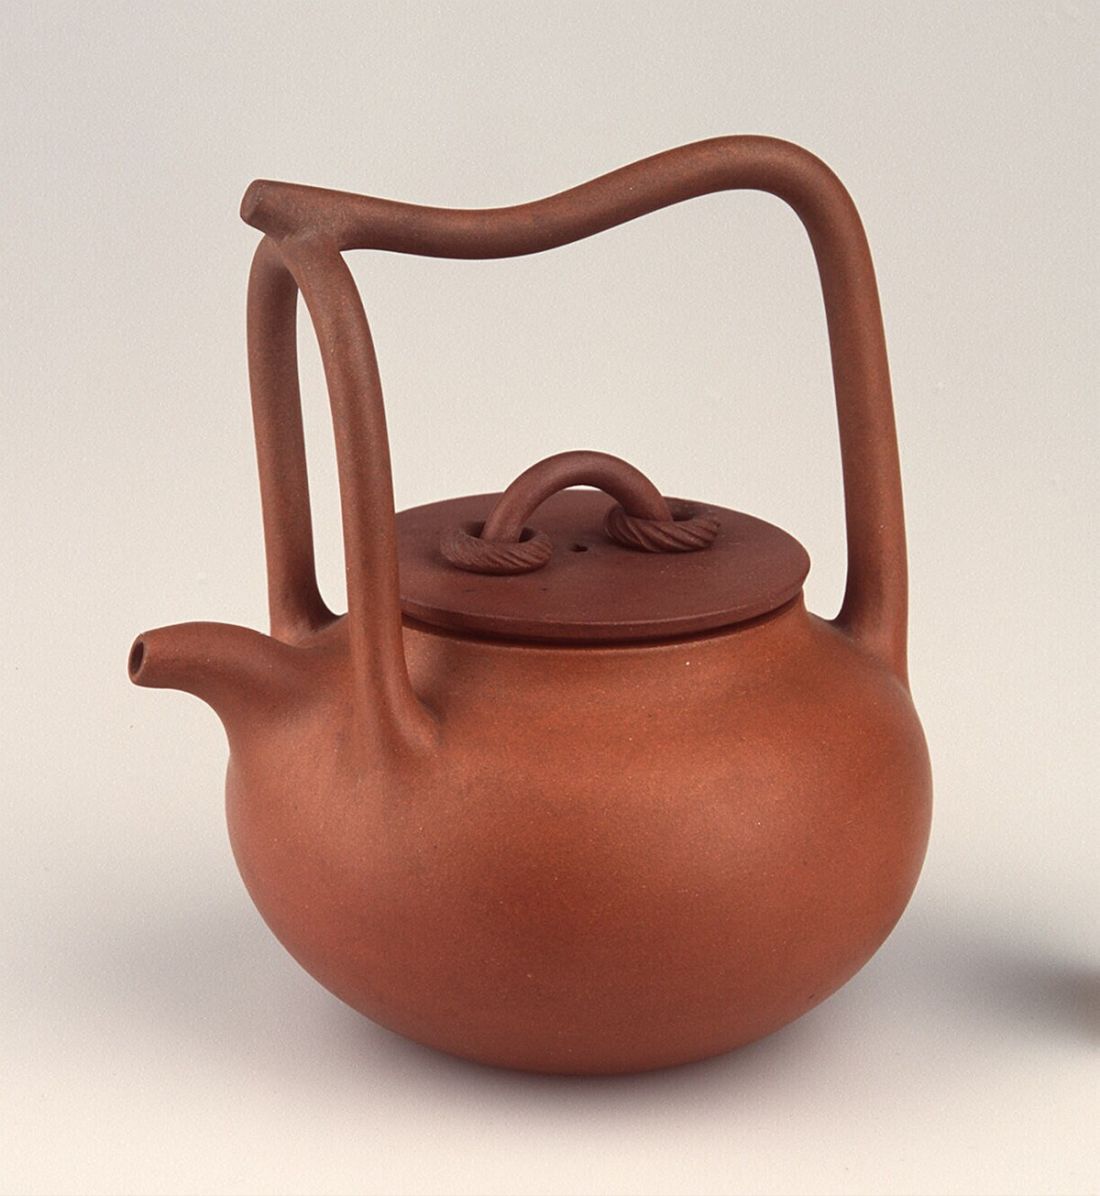 a clay teapot with a small spout and large upright handle